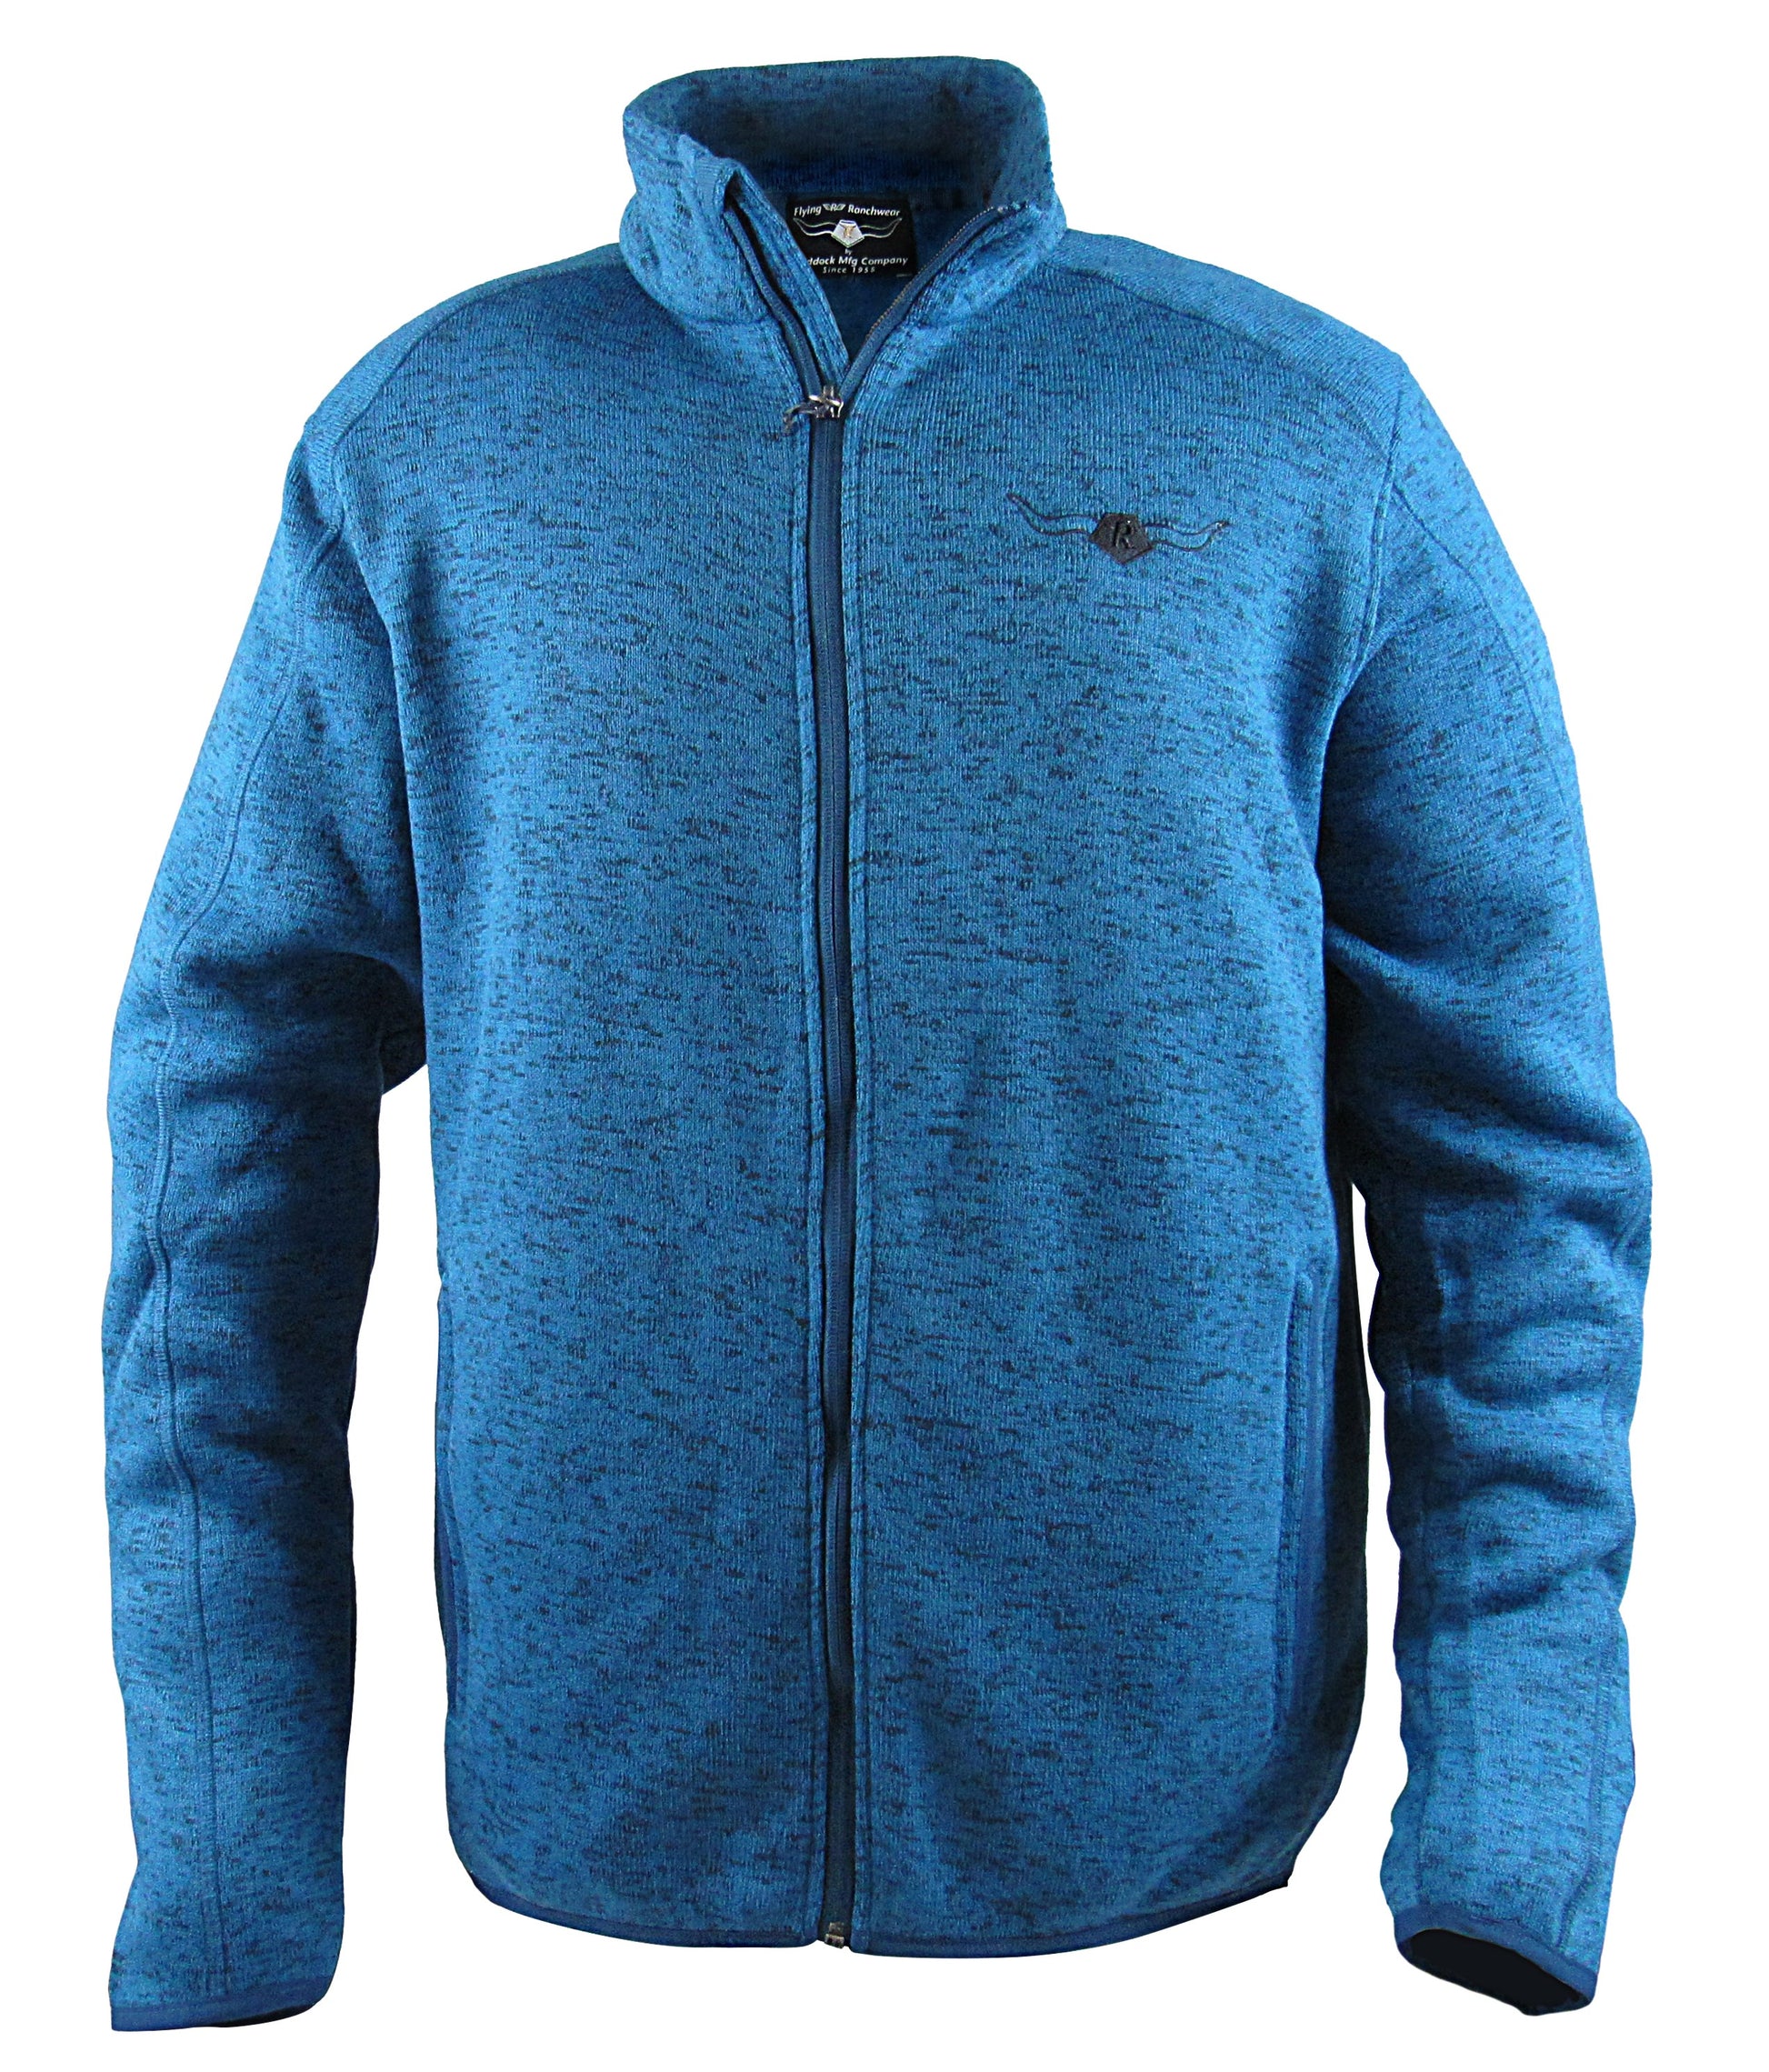 Fleece jacket with pockets and Flying R embroidery on chest in power blue heather